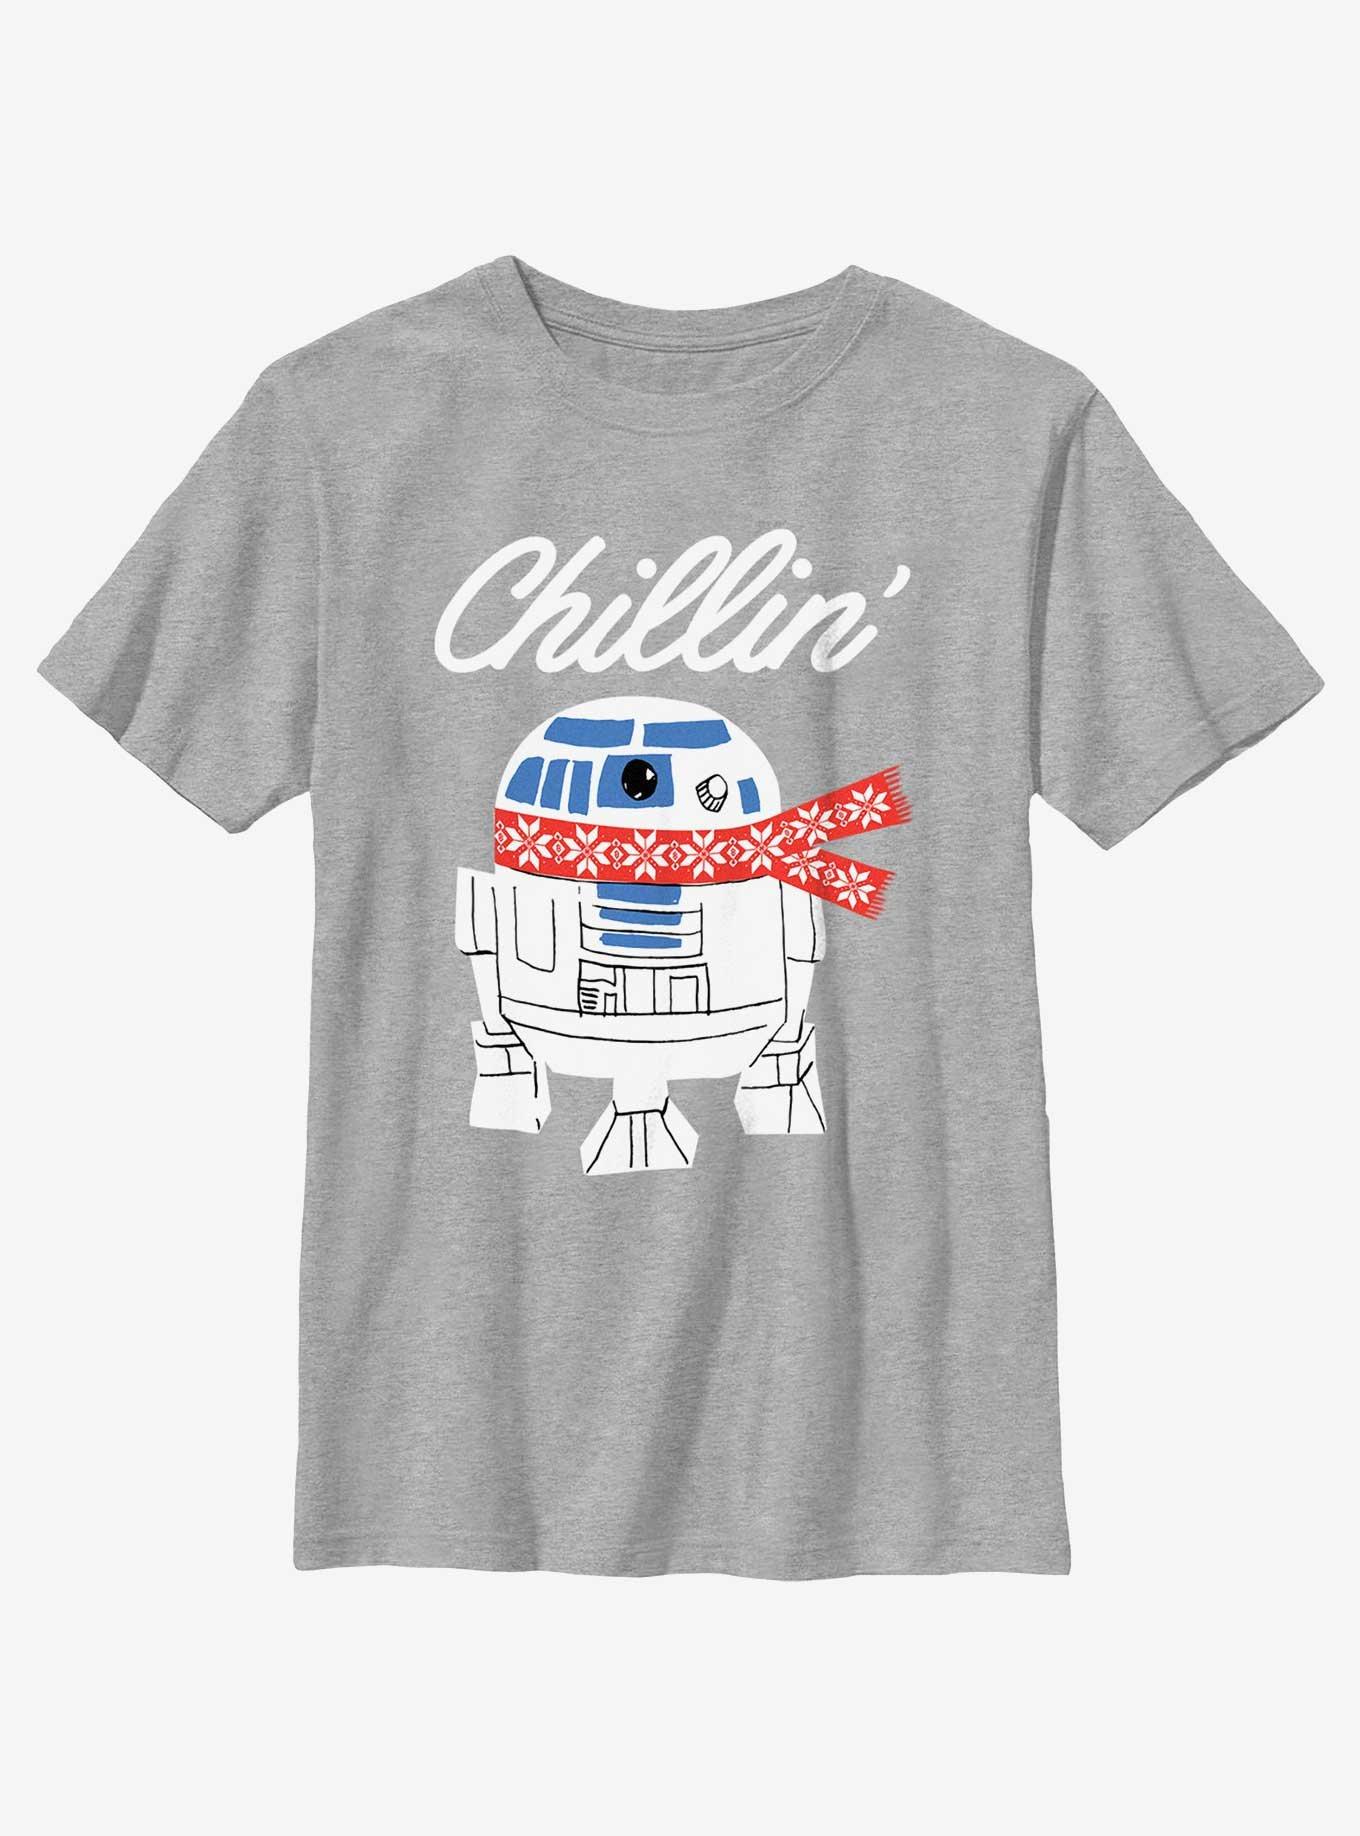 Star Wars R2-D2 Chillin' Youth T-Shirt, ATH HTR, hi-res